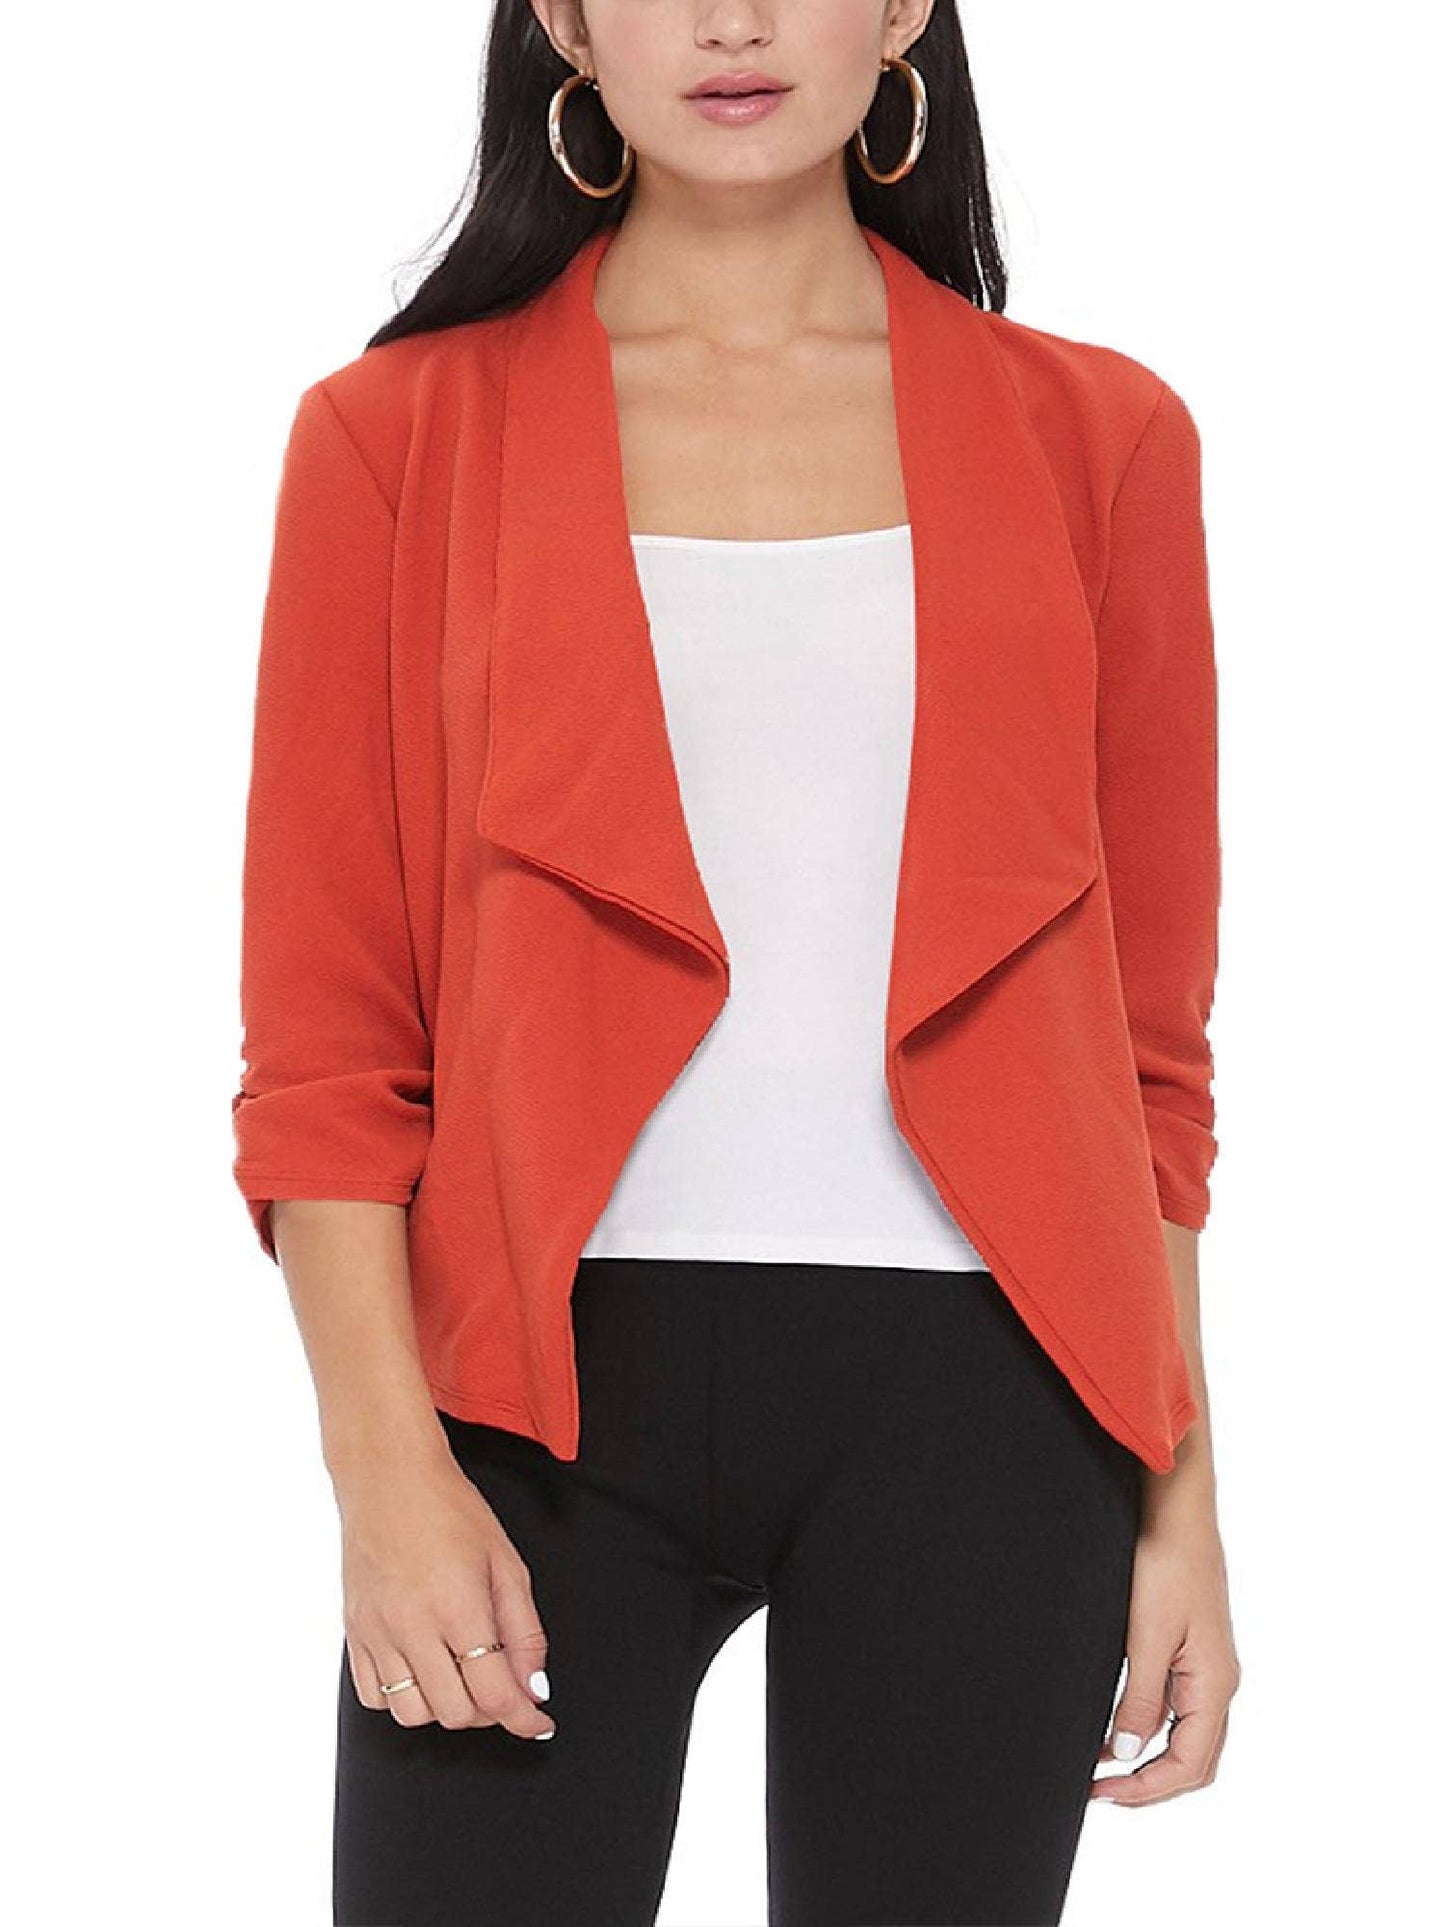 Falling for you Casual Open Front Slim Fit Draped Solid Blazer Jacket